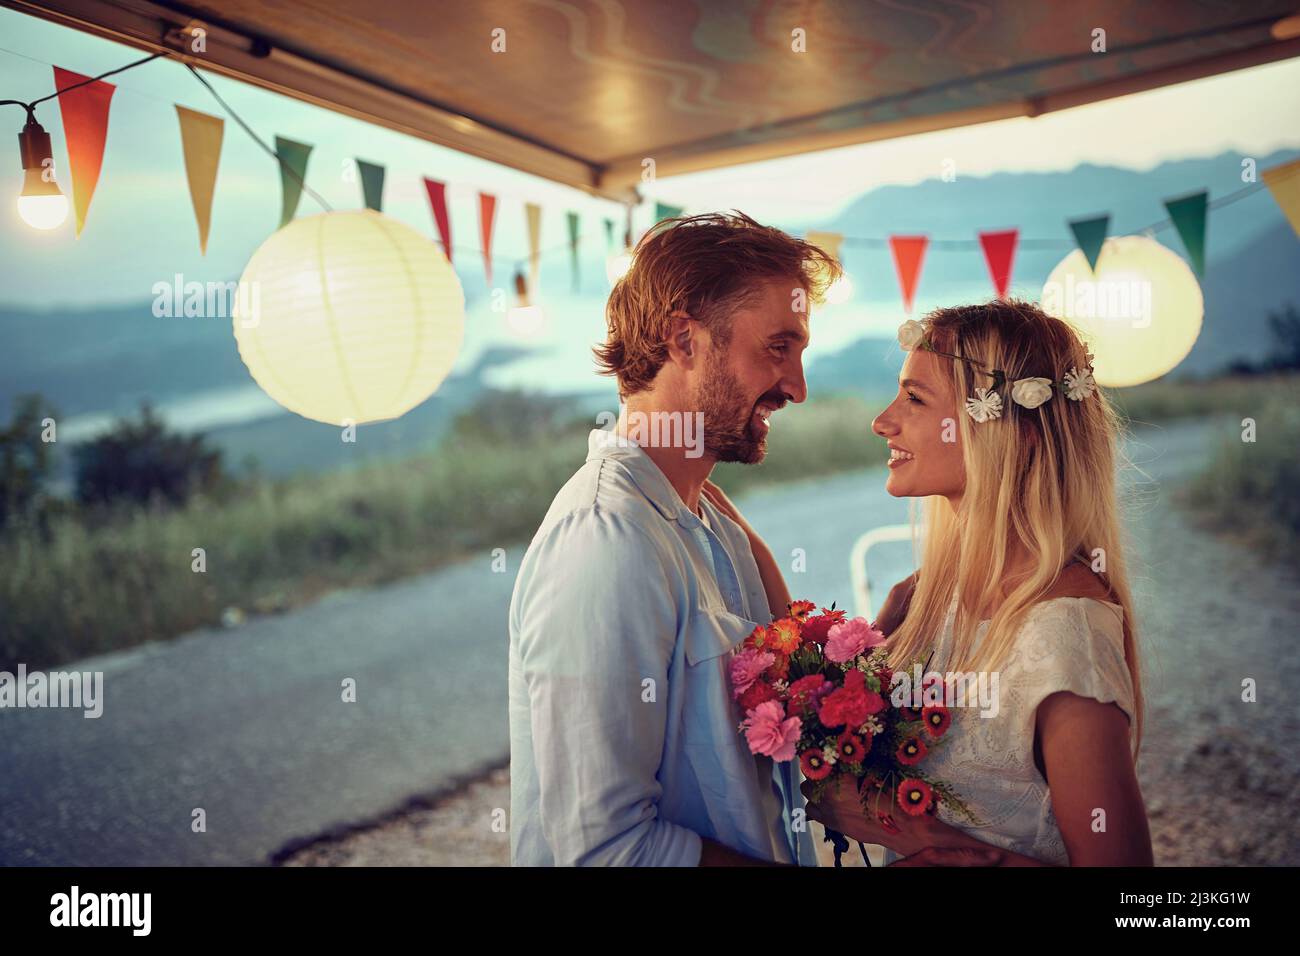 Boho style wedding couple at sunset in front of camper rv smilling at each other. Bride with bridal bouquet. Wedding ceremony, love, nature concept Stock Photo